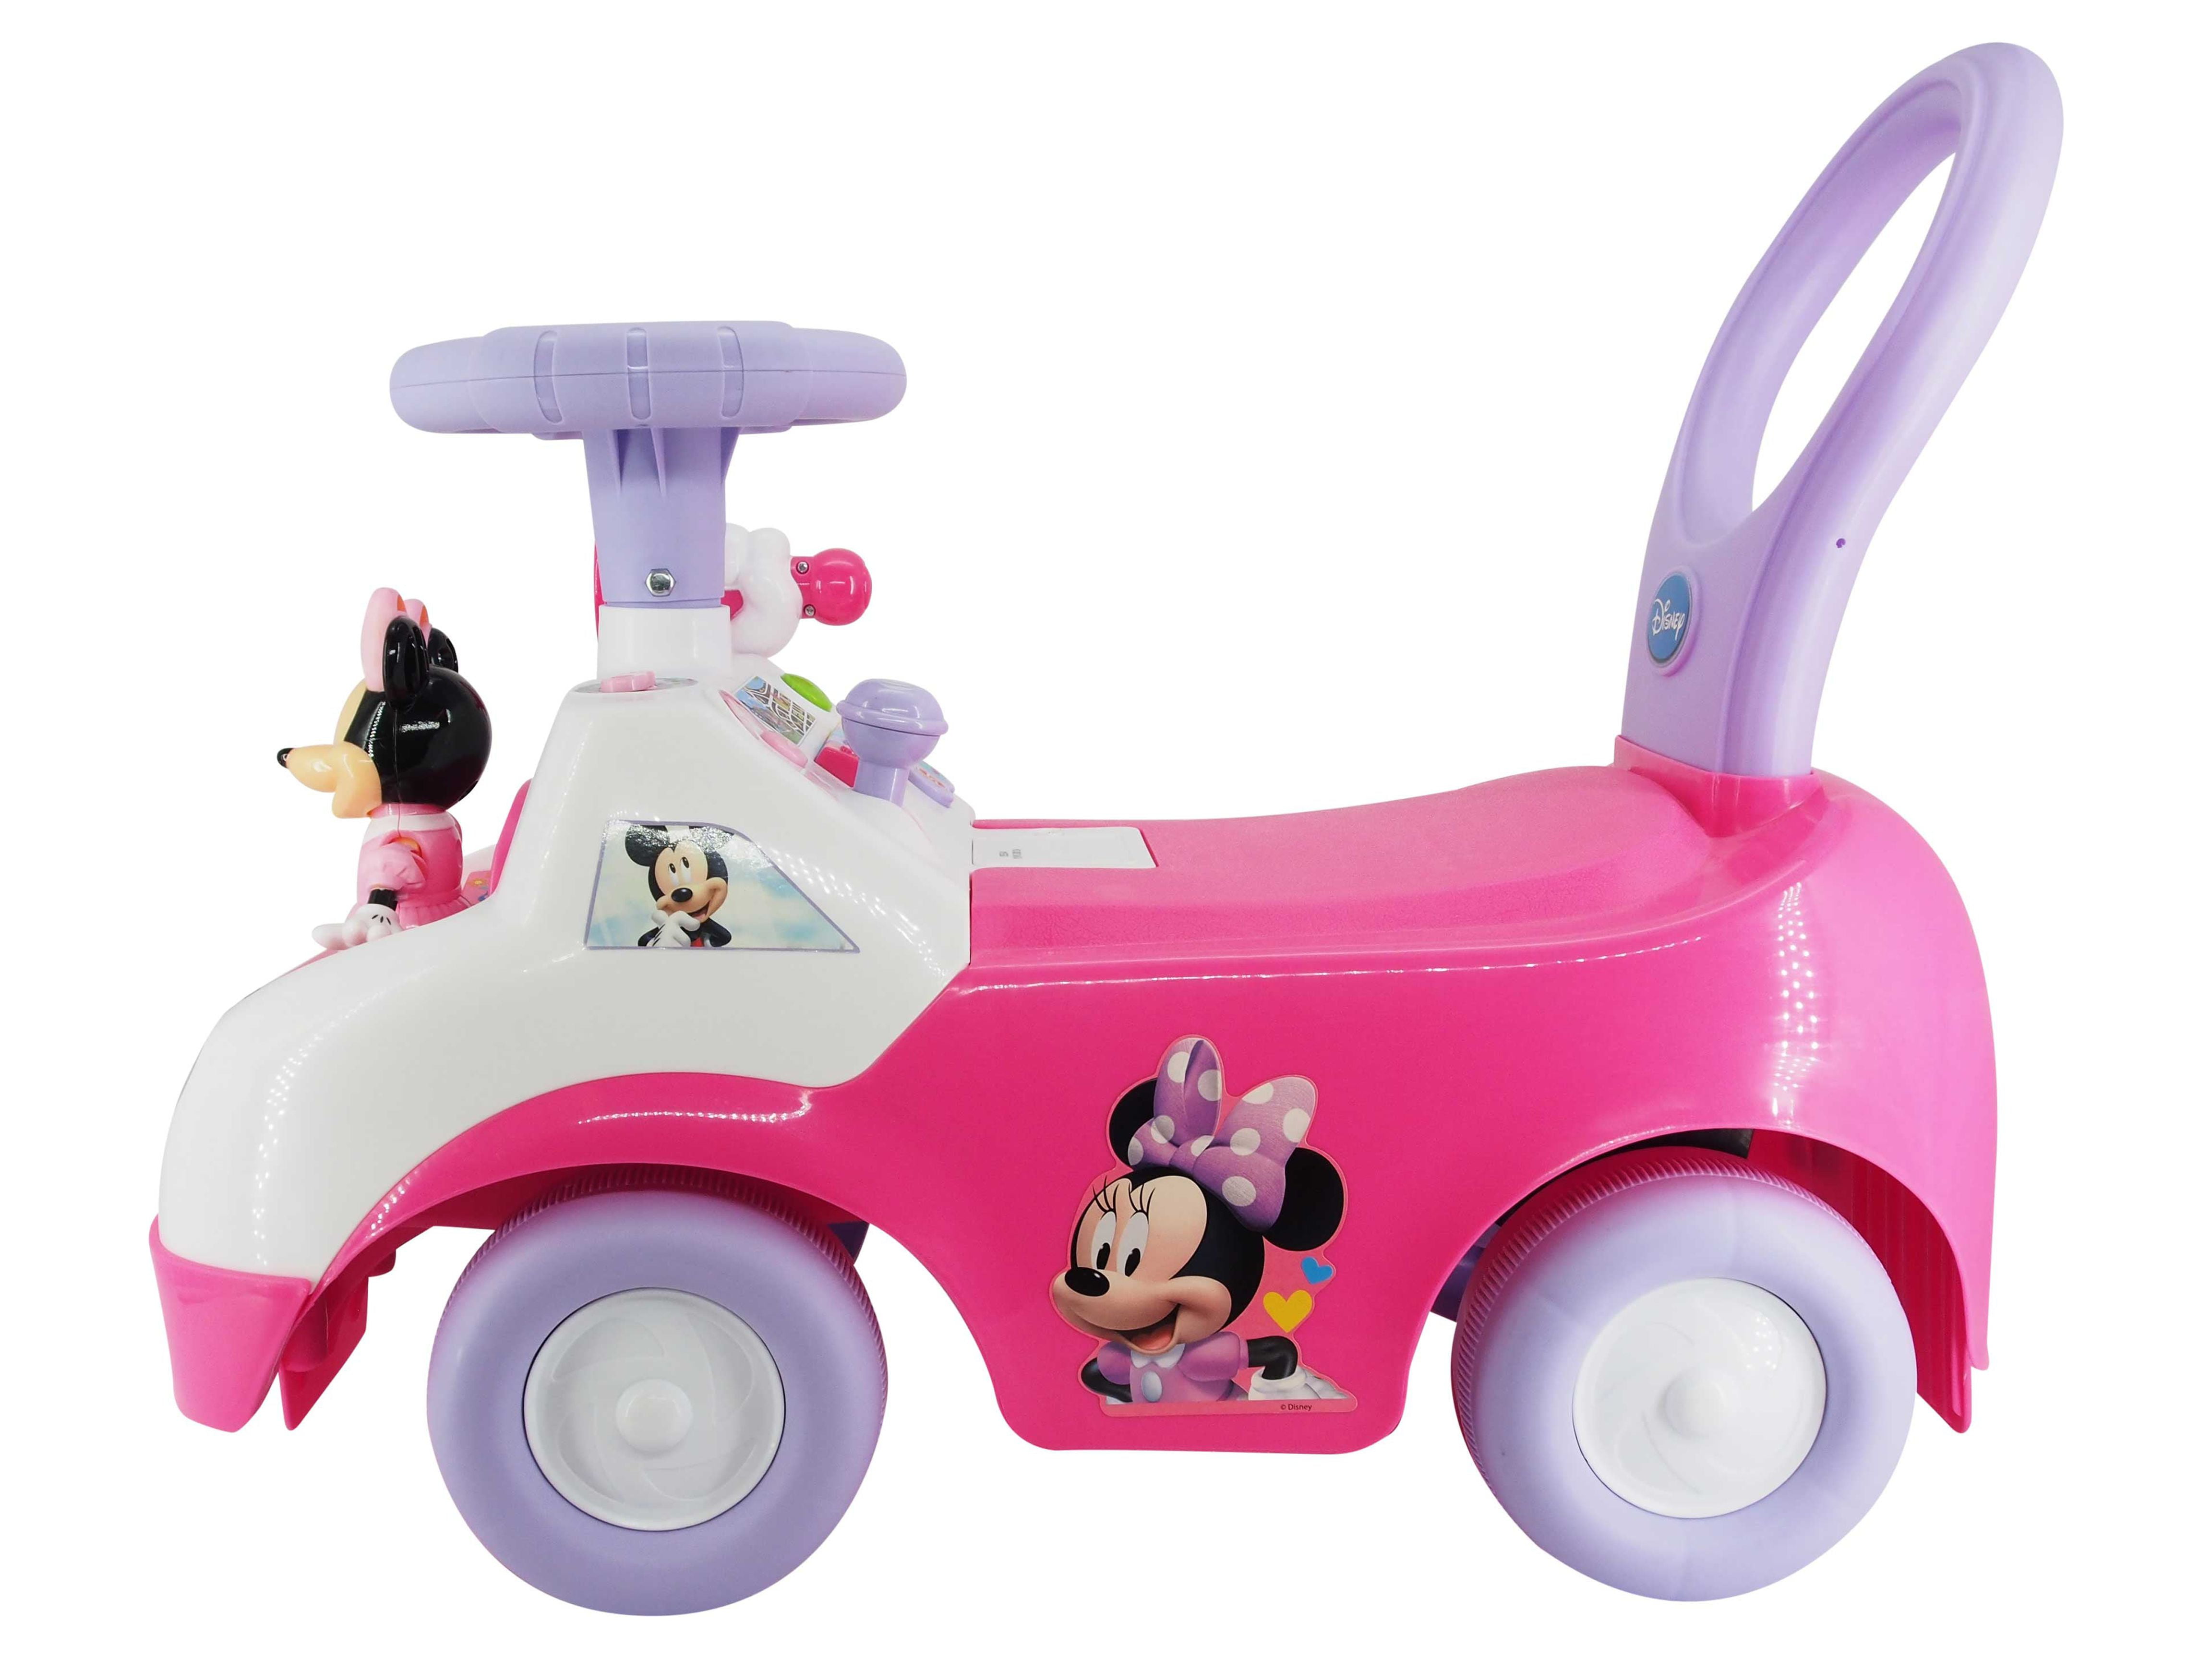 Kiddieland Minnie Mouse Dancing Activity Interactive Ride-On Car with  Sounds